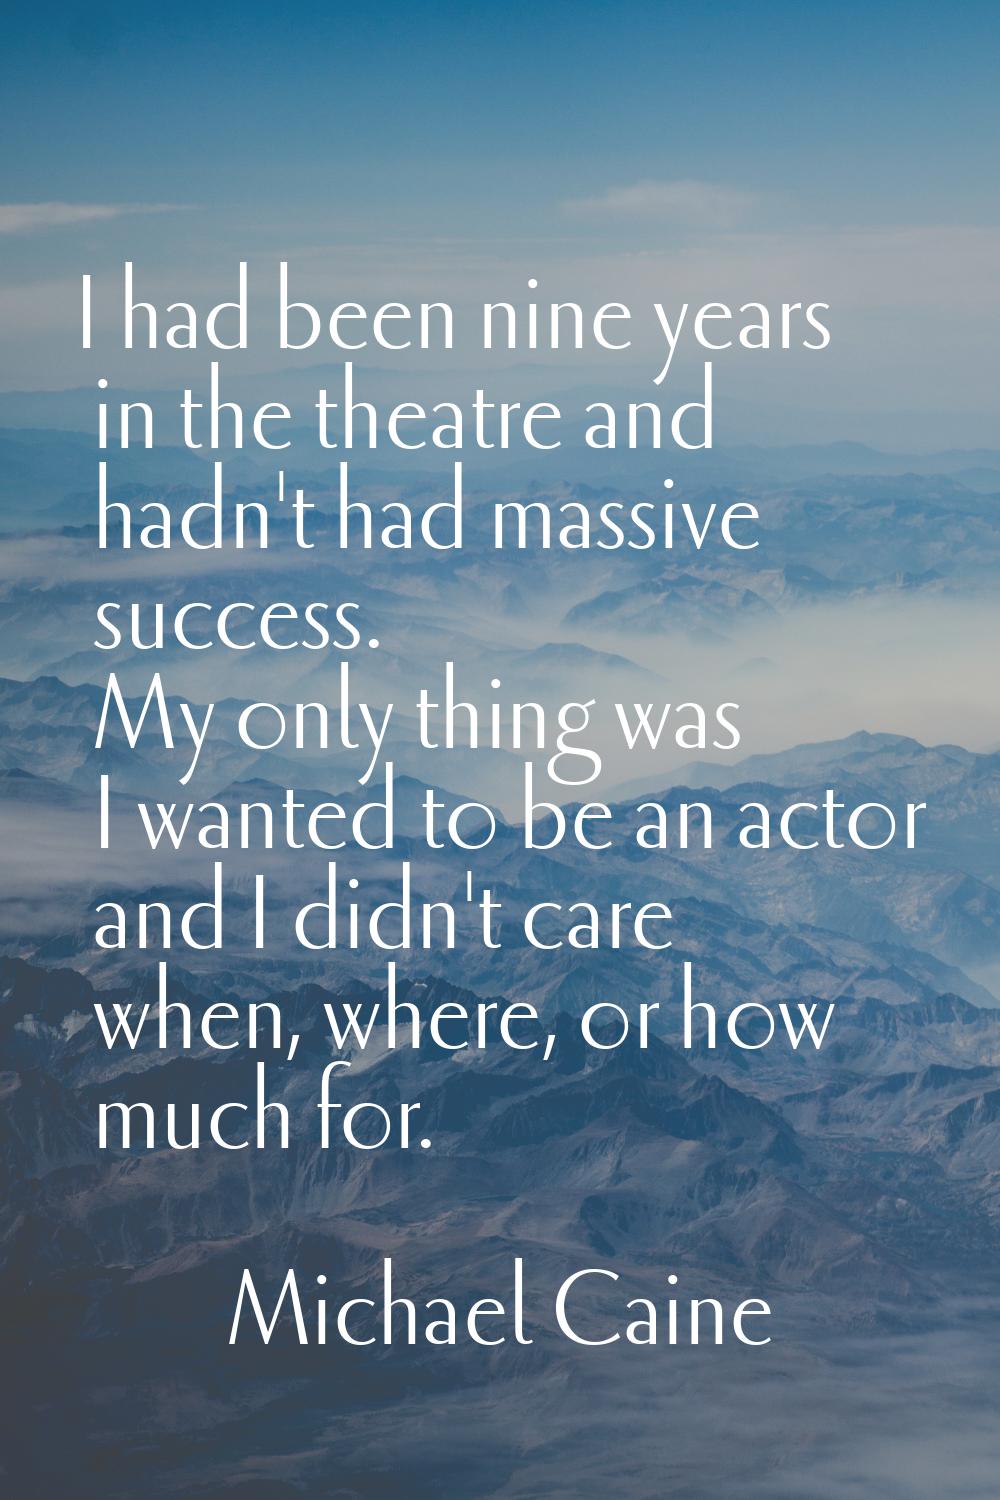 I had been nine years in the theatre and hadn't had massive success. My only thing was I wanted to 